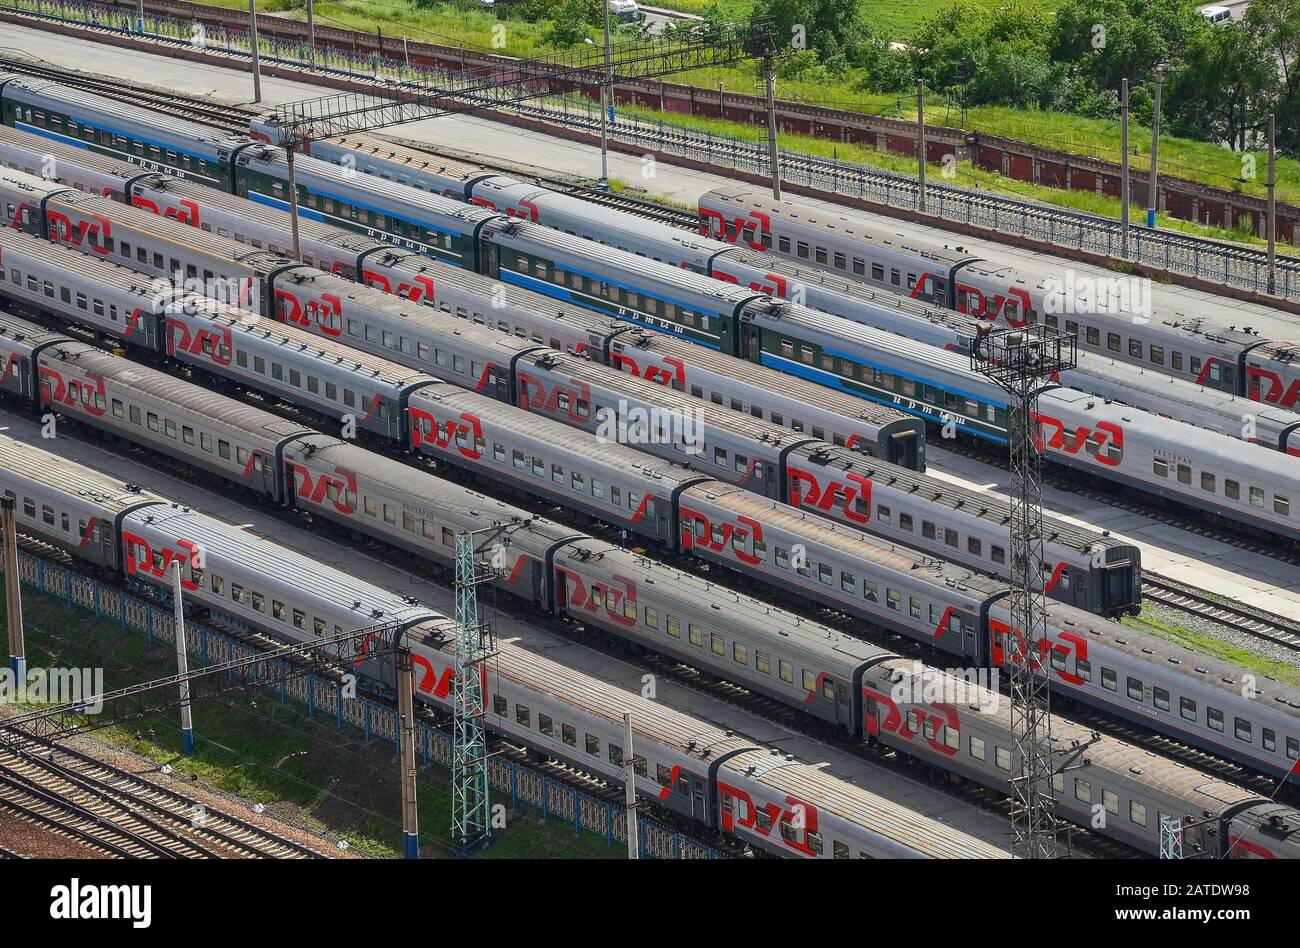 NOVOSIBIRSK, RUSSIA - 15 JULY 2013: Many wagons and trains. Aerial view. Railway transport in Russia, Novosibirsk Stock Photo